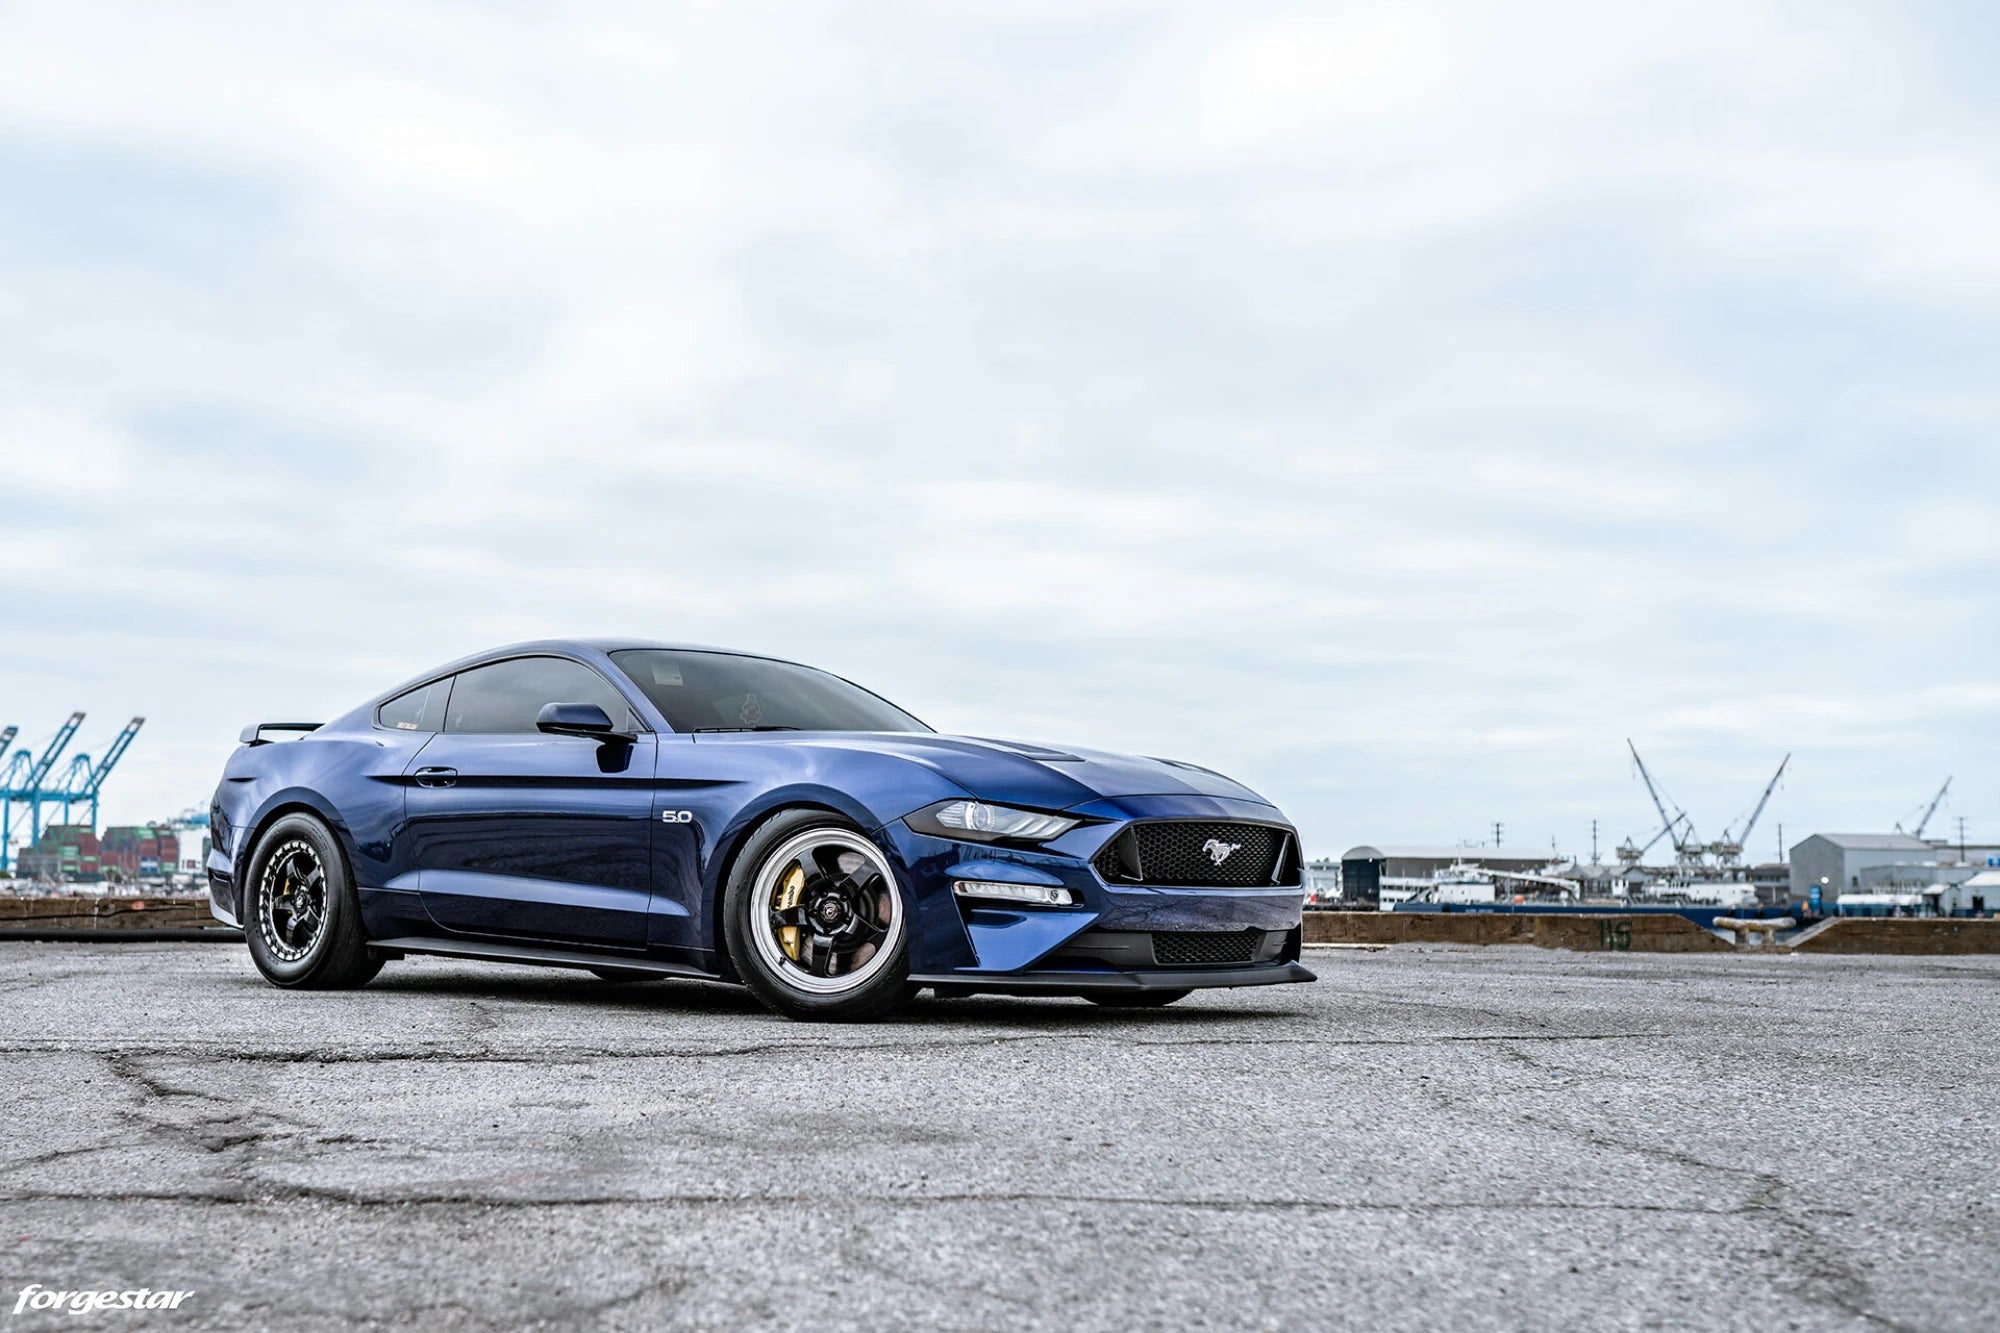 Forgestar D5 Wheel S550 / S650 Mustang Fitment